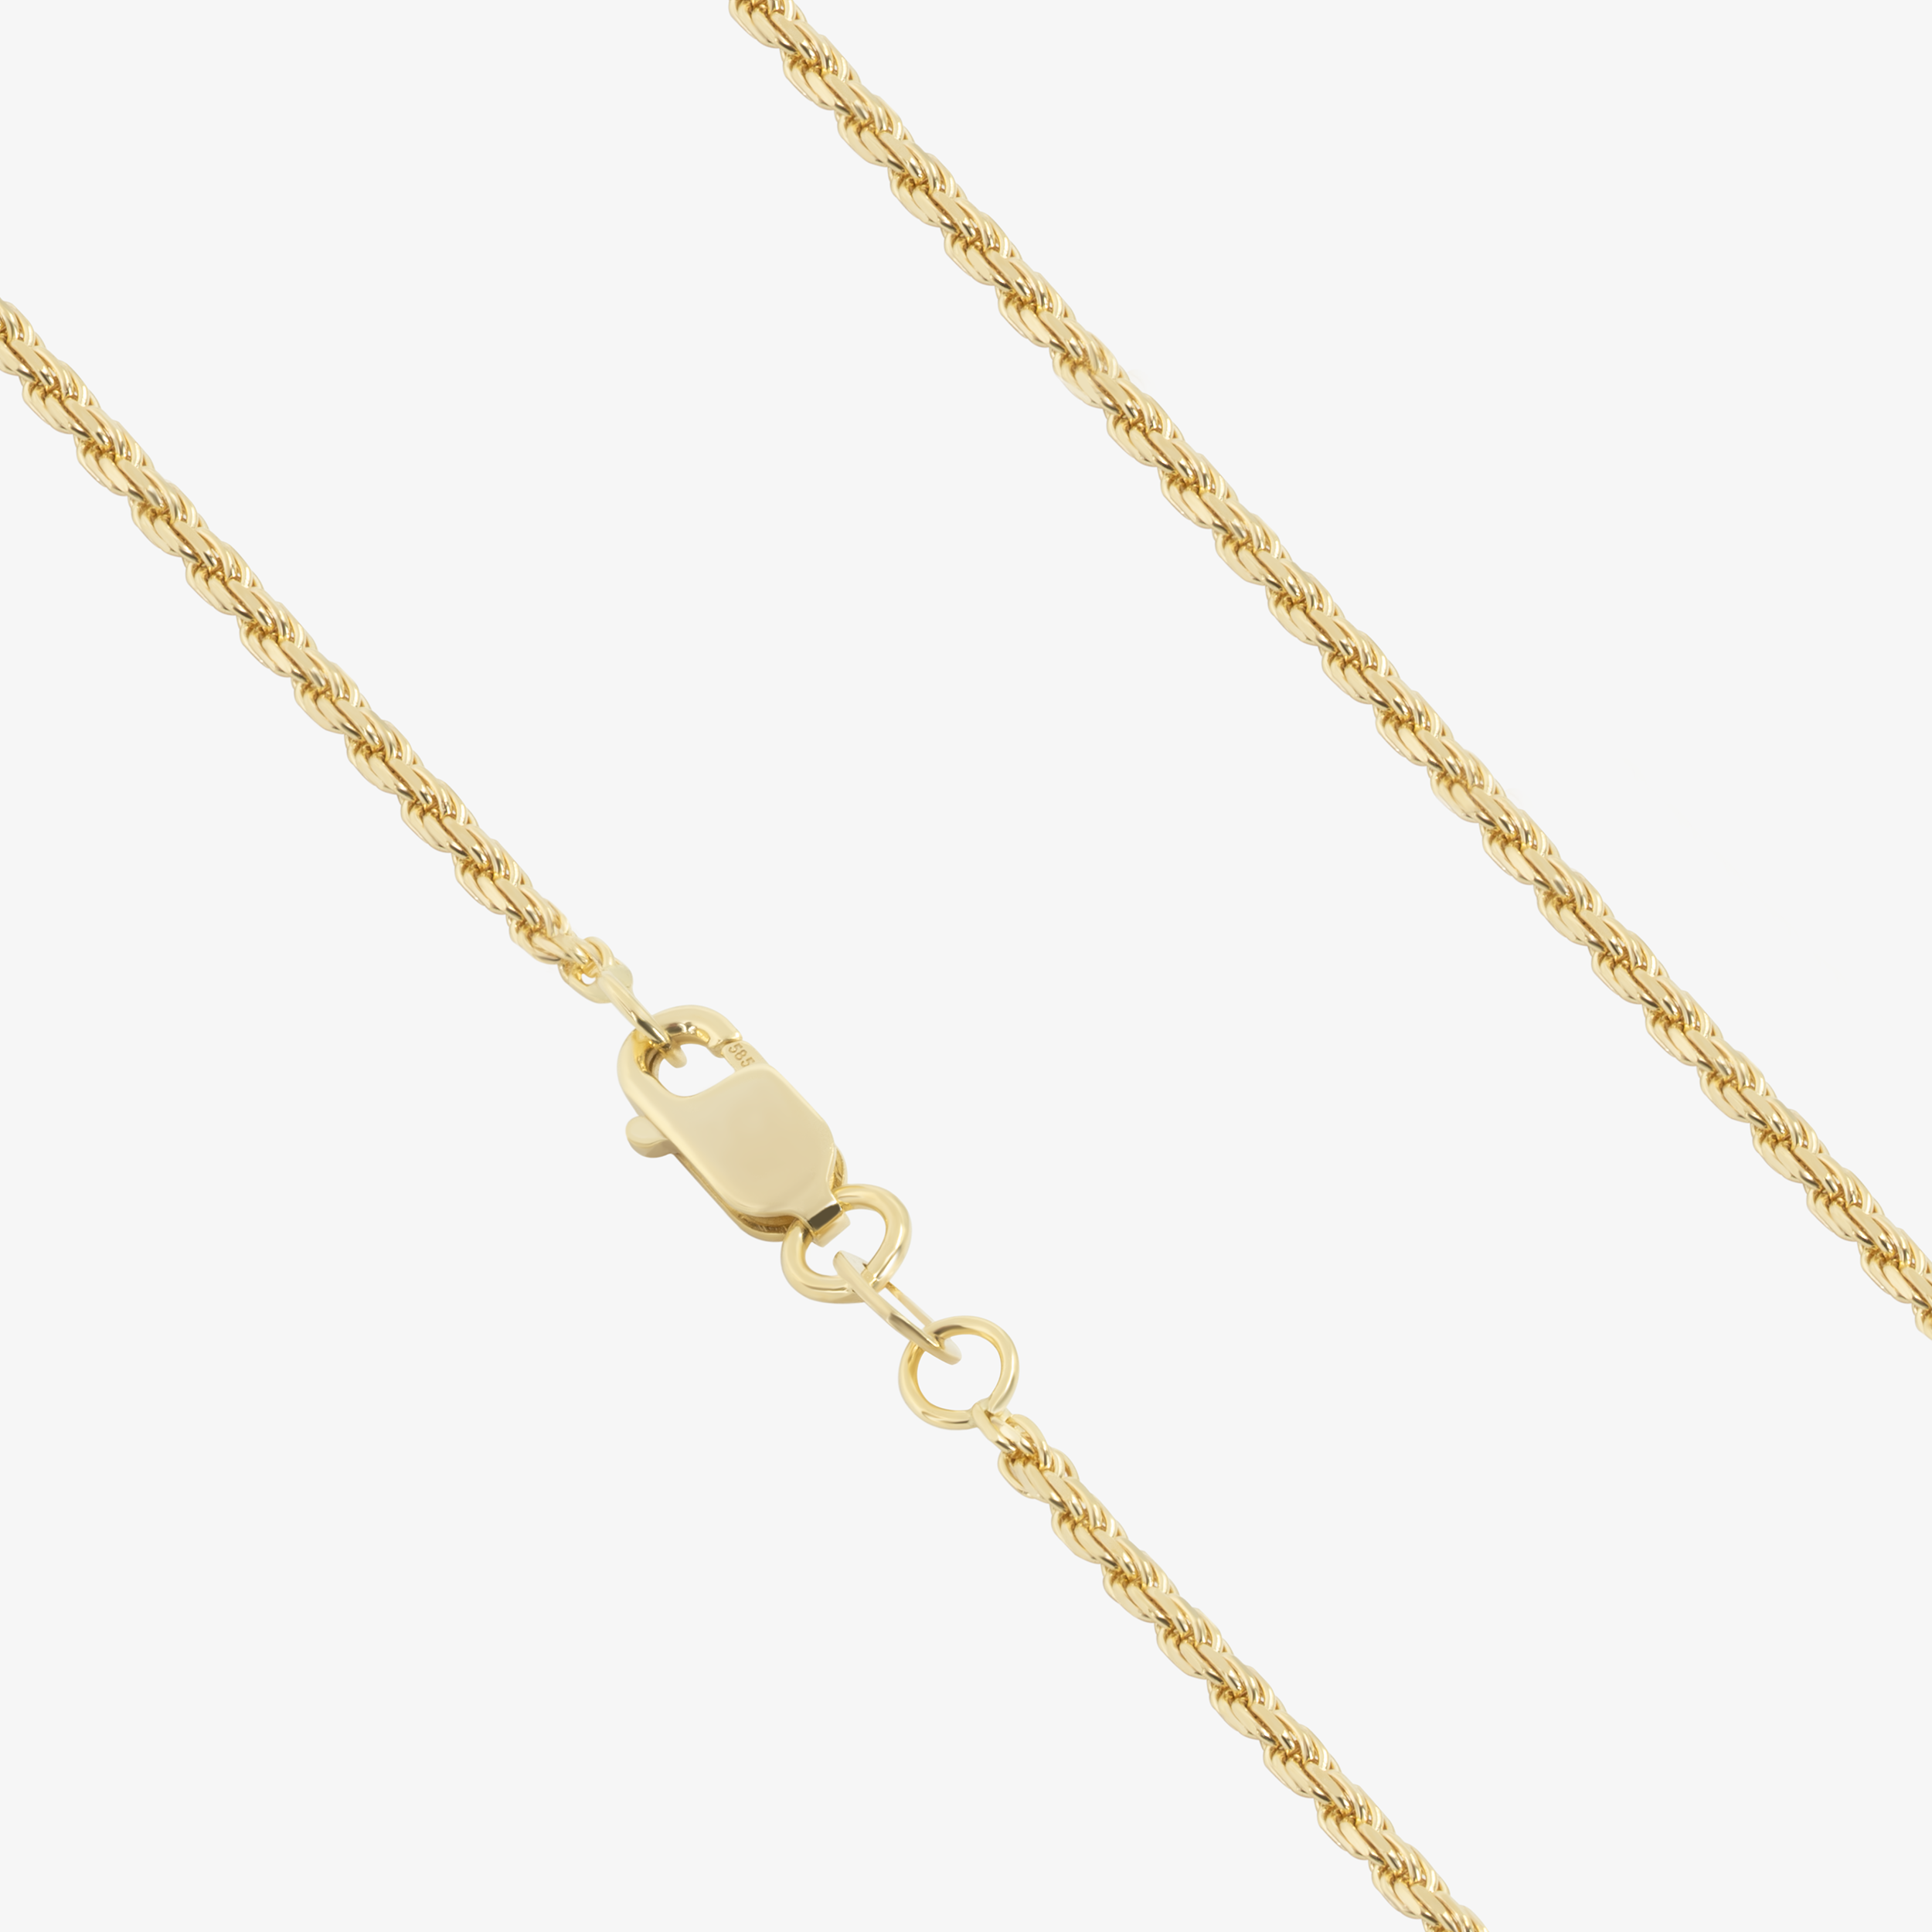 1.75mm Rope Chain in 14K Solid Yellow Gold